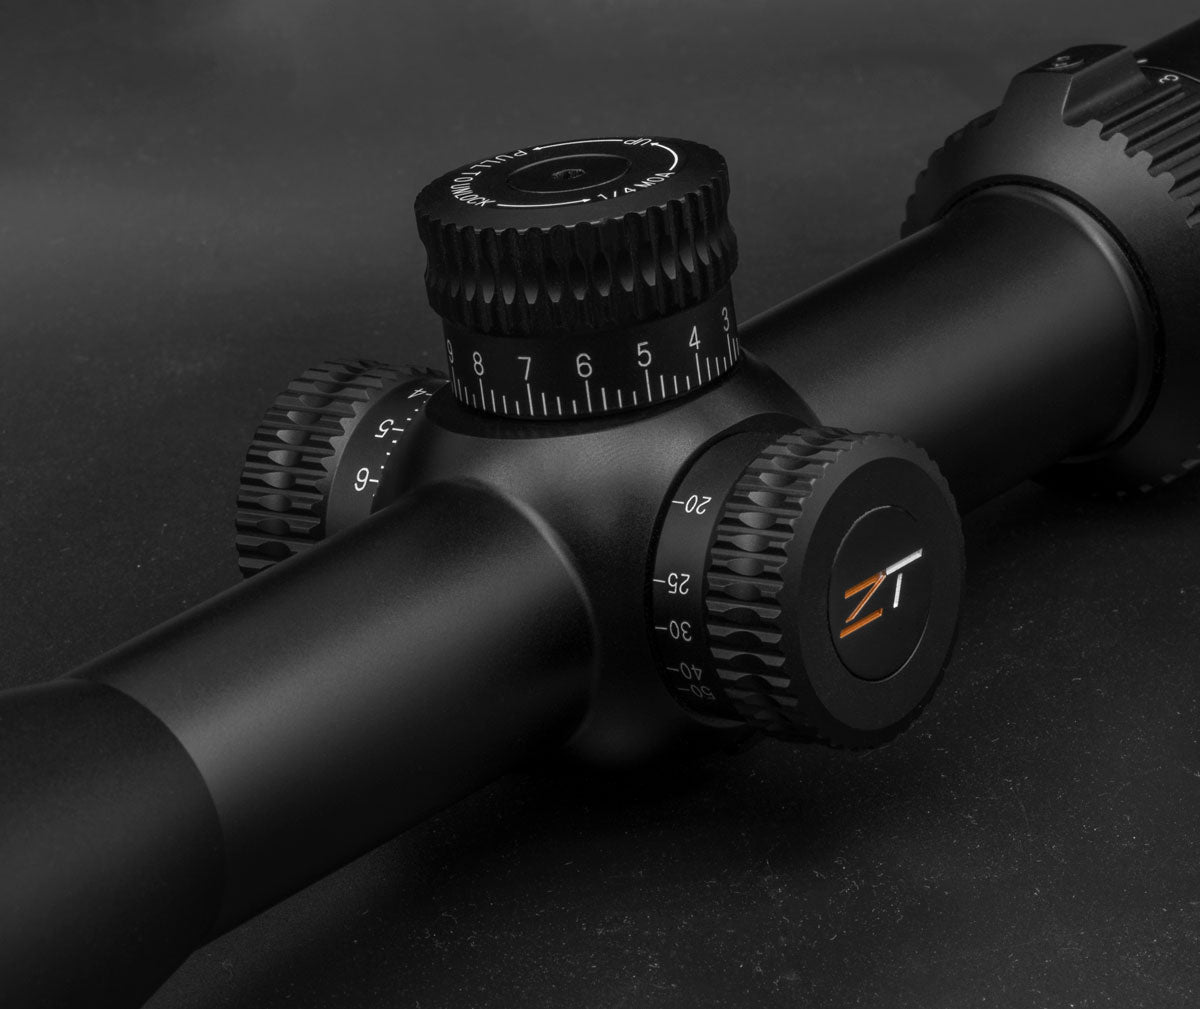 Zerotech Vengenance 4-20x50 R3 Scope -  - Mansfield Hunting & Fishing - Products to prepare for Corona Virus